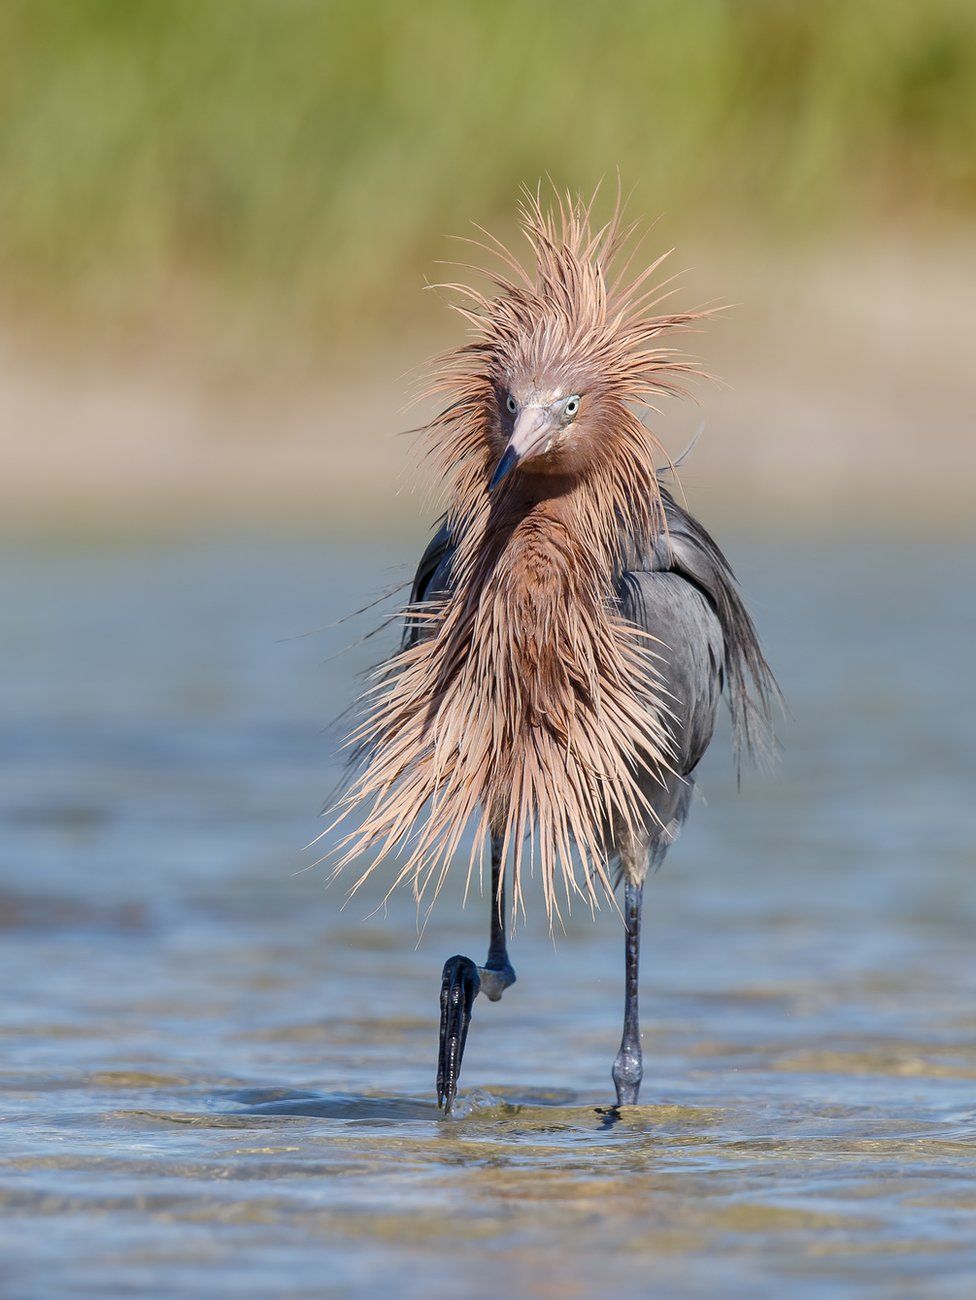 A bird with wet spiky feathers